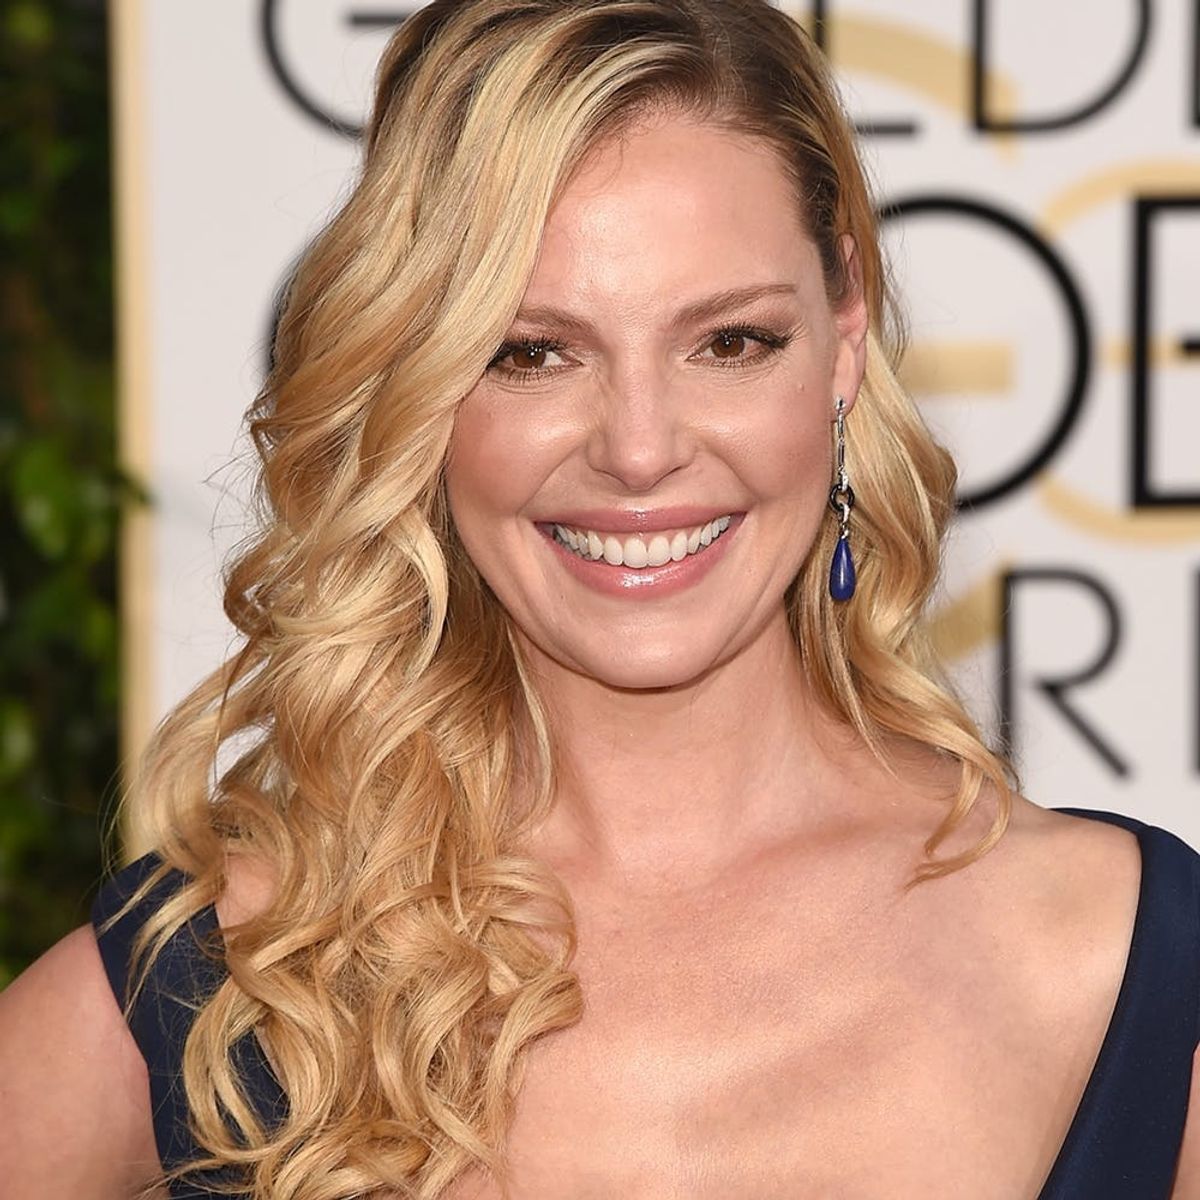 Katherine Heigl Just Got the Most Dramatic Haircut of the Year